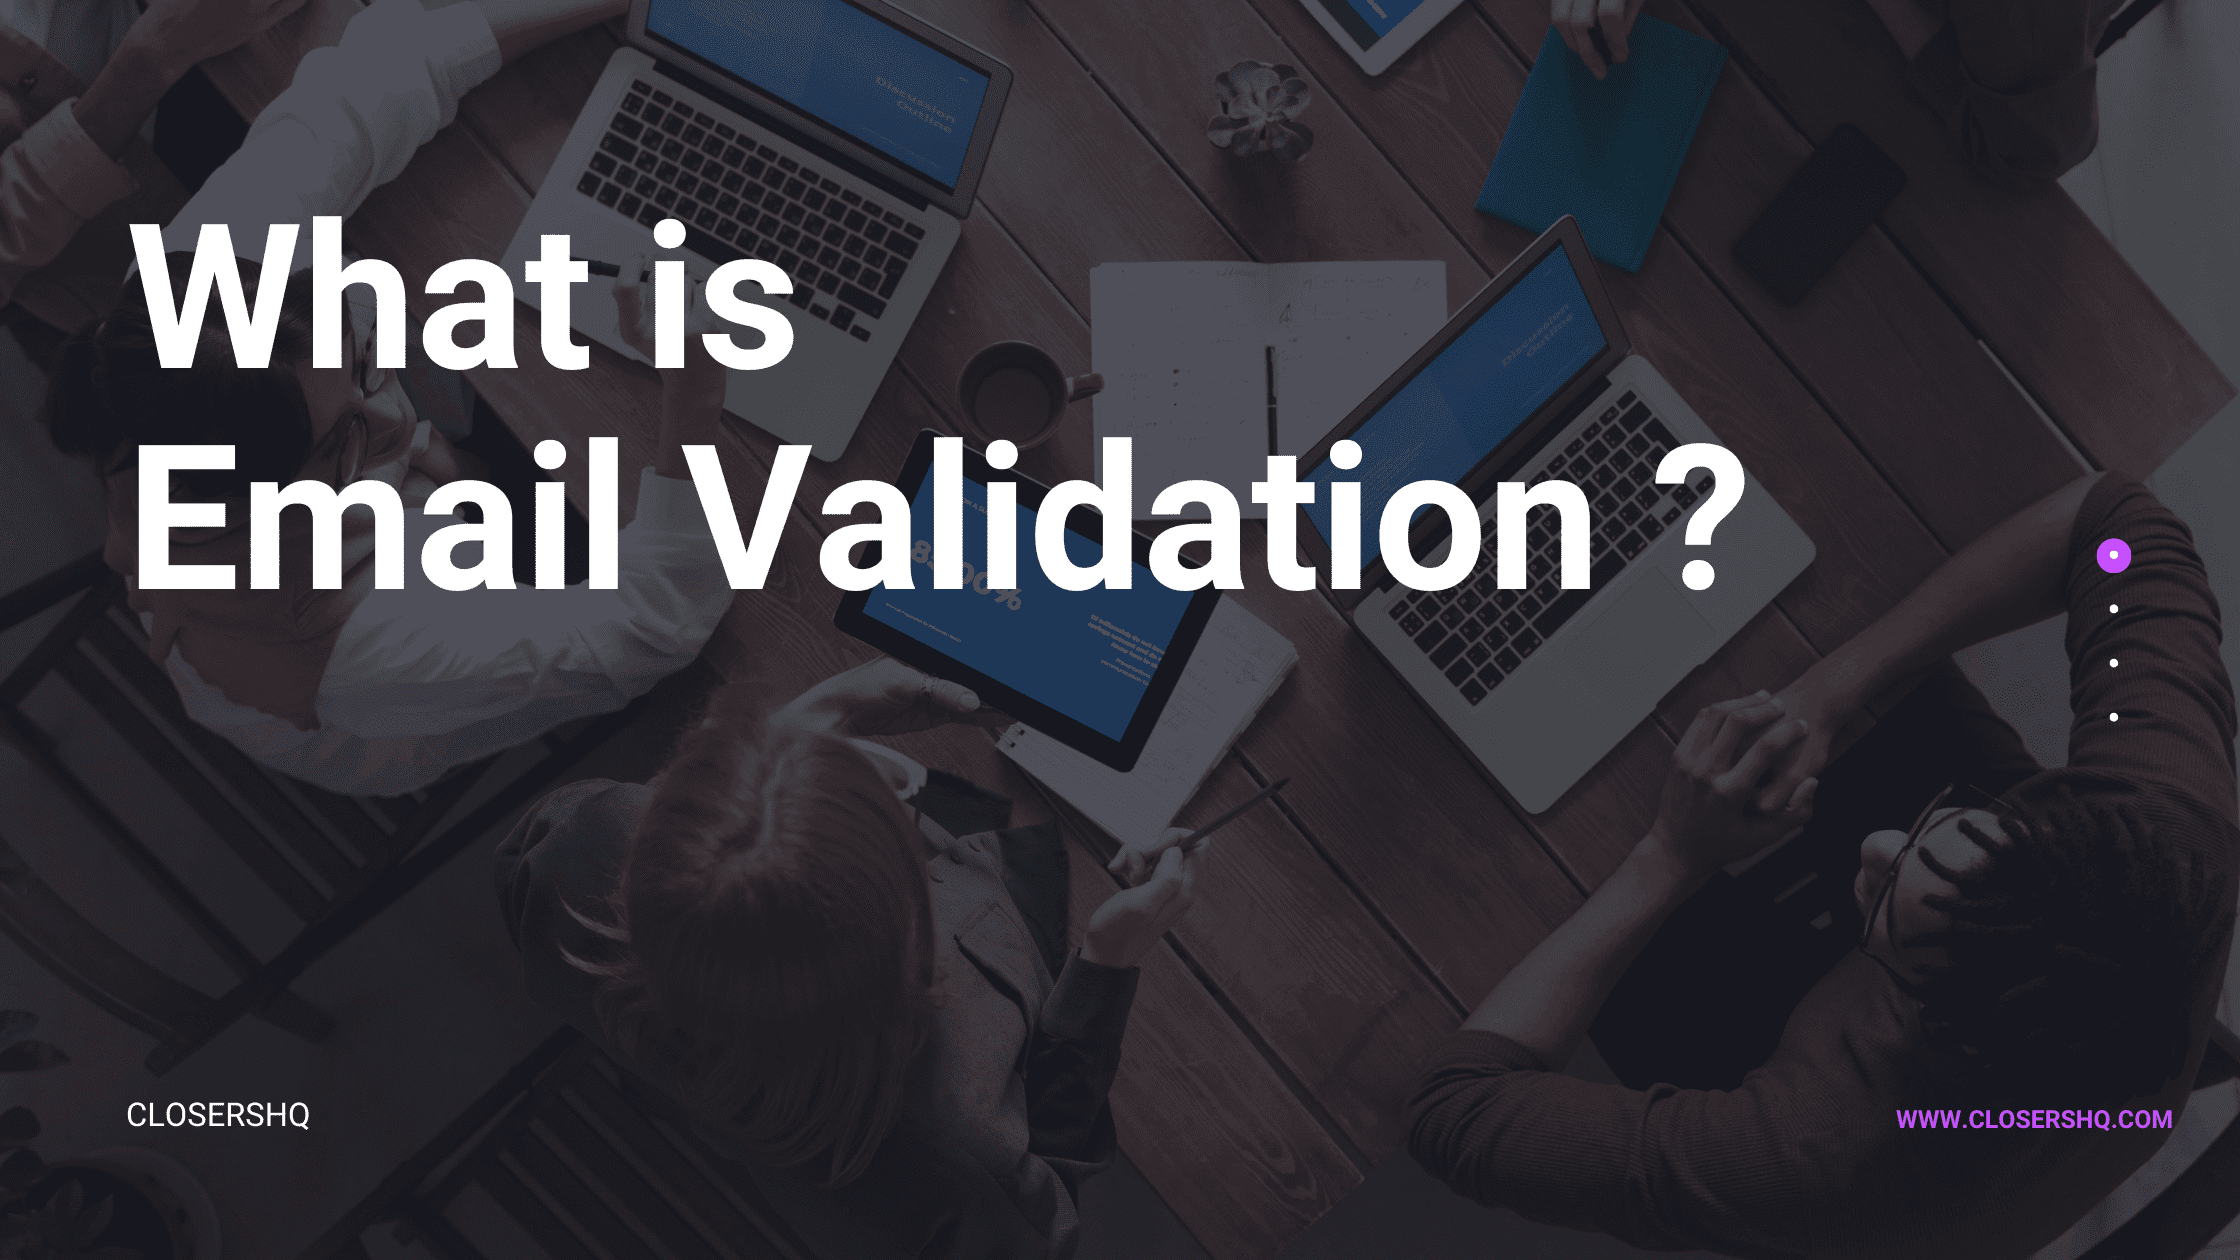 Email Validation: Why Should We Care About Validating Emails?